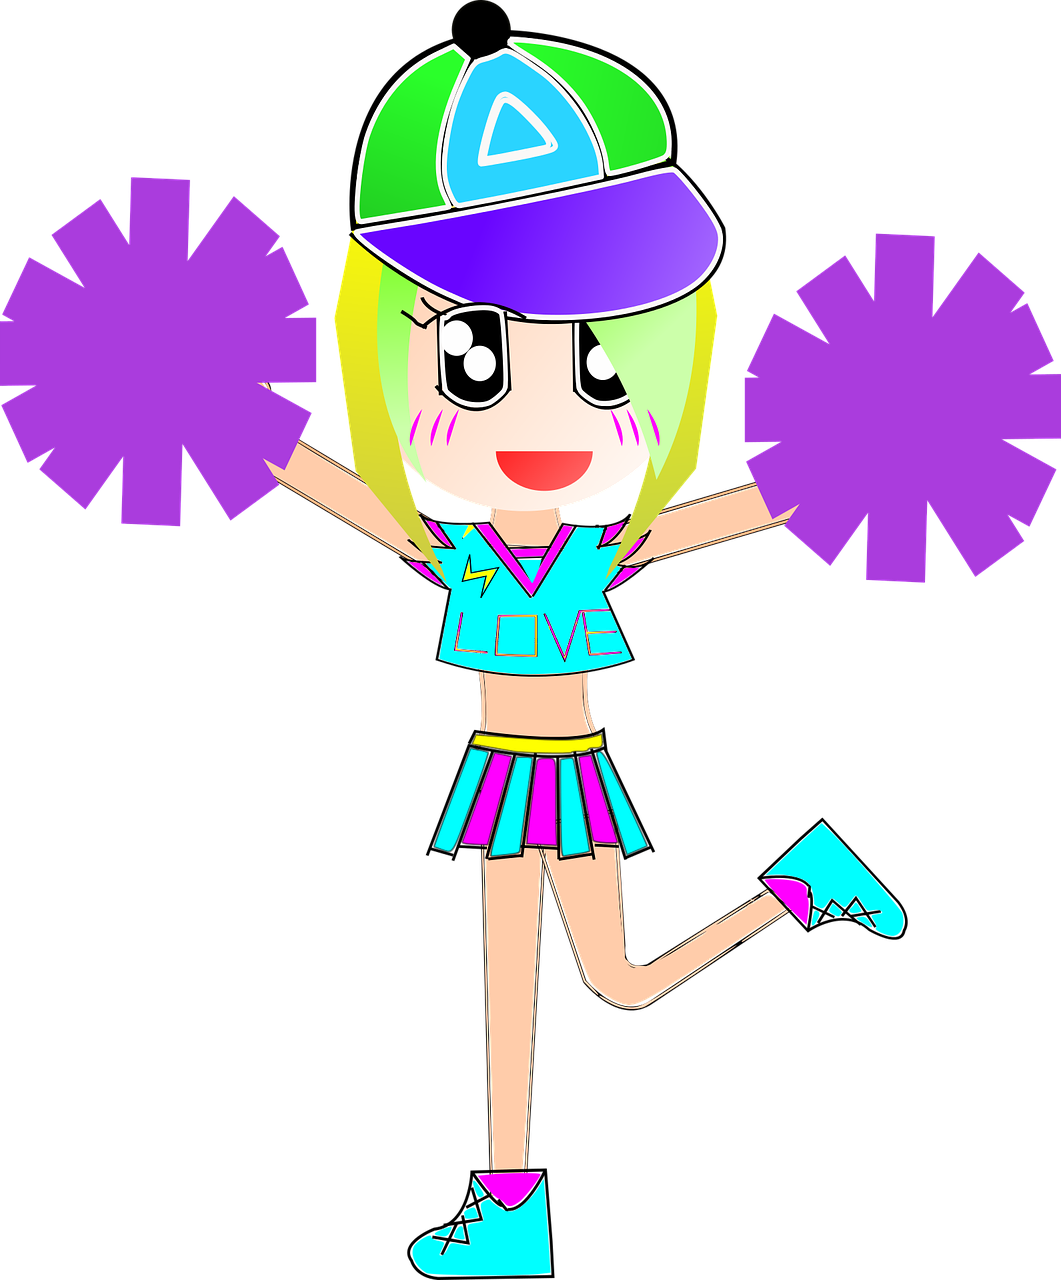 Animated Cheerleaderwith Pom Poms PNG image